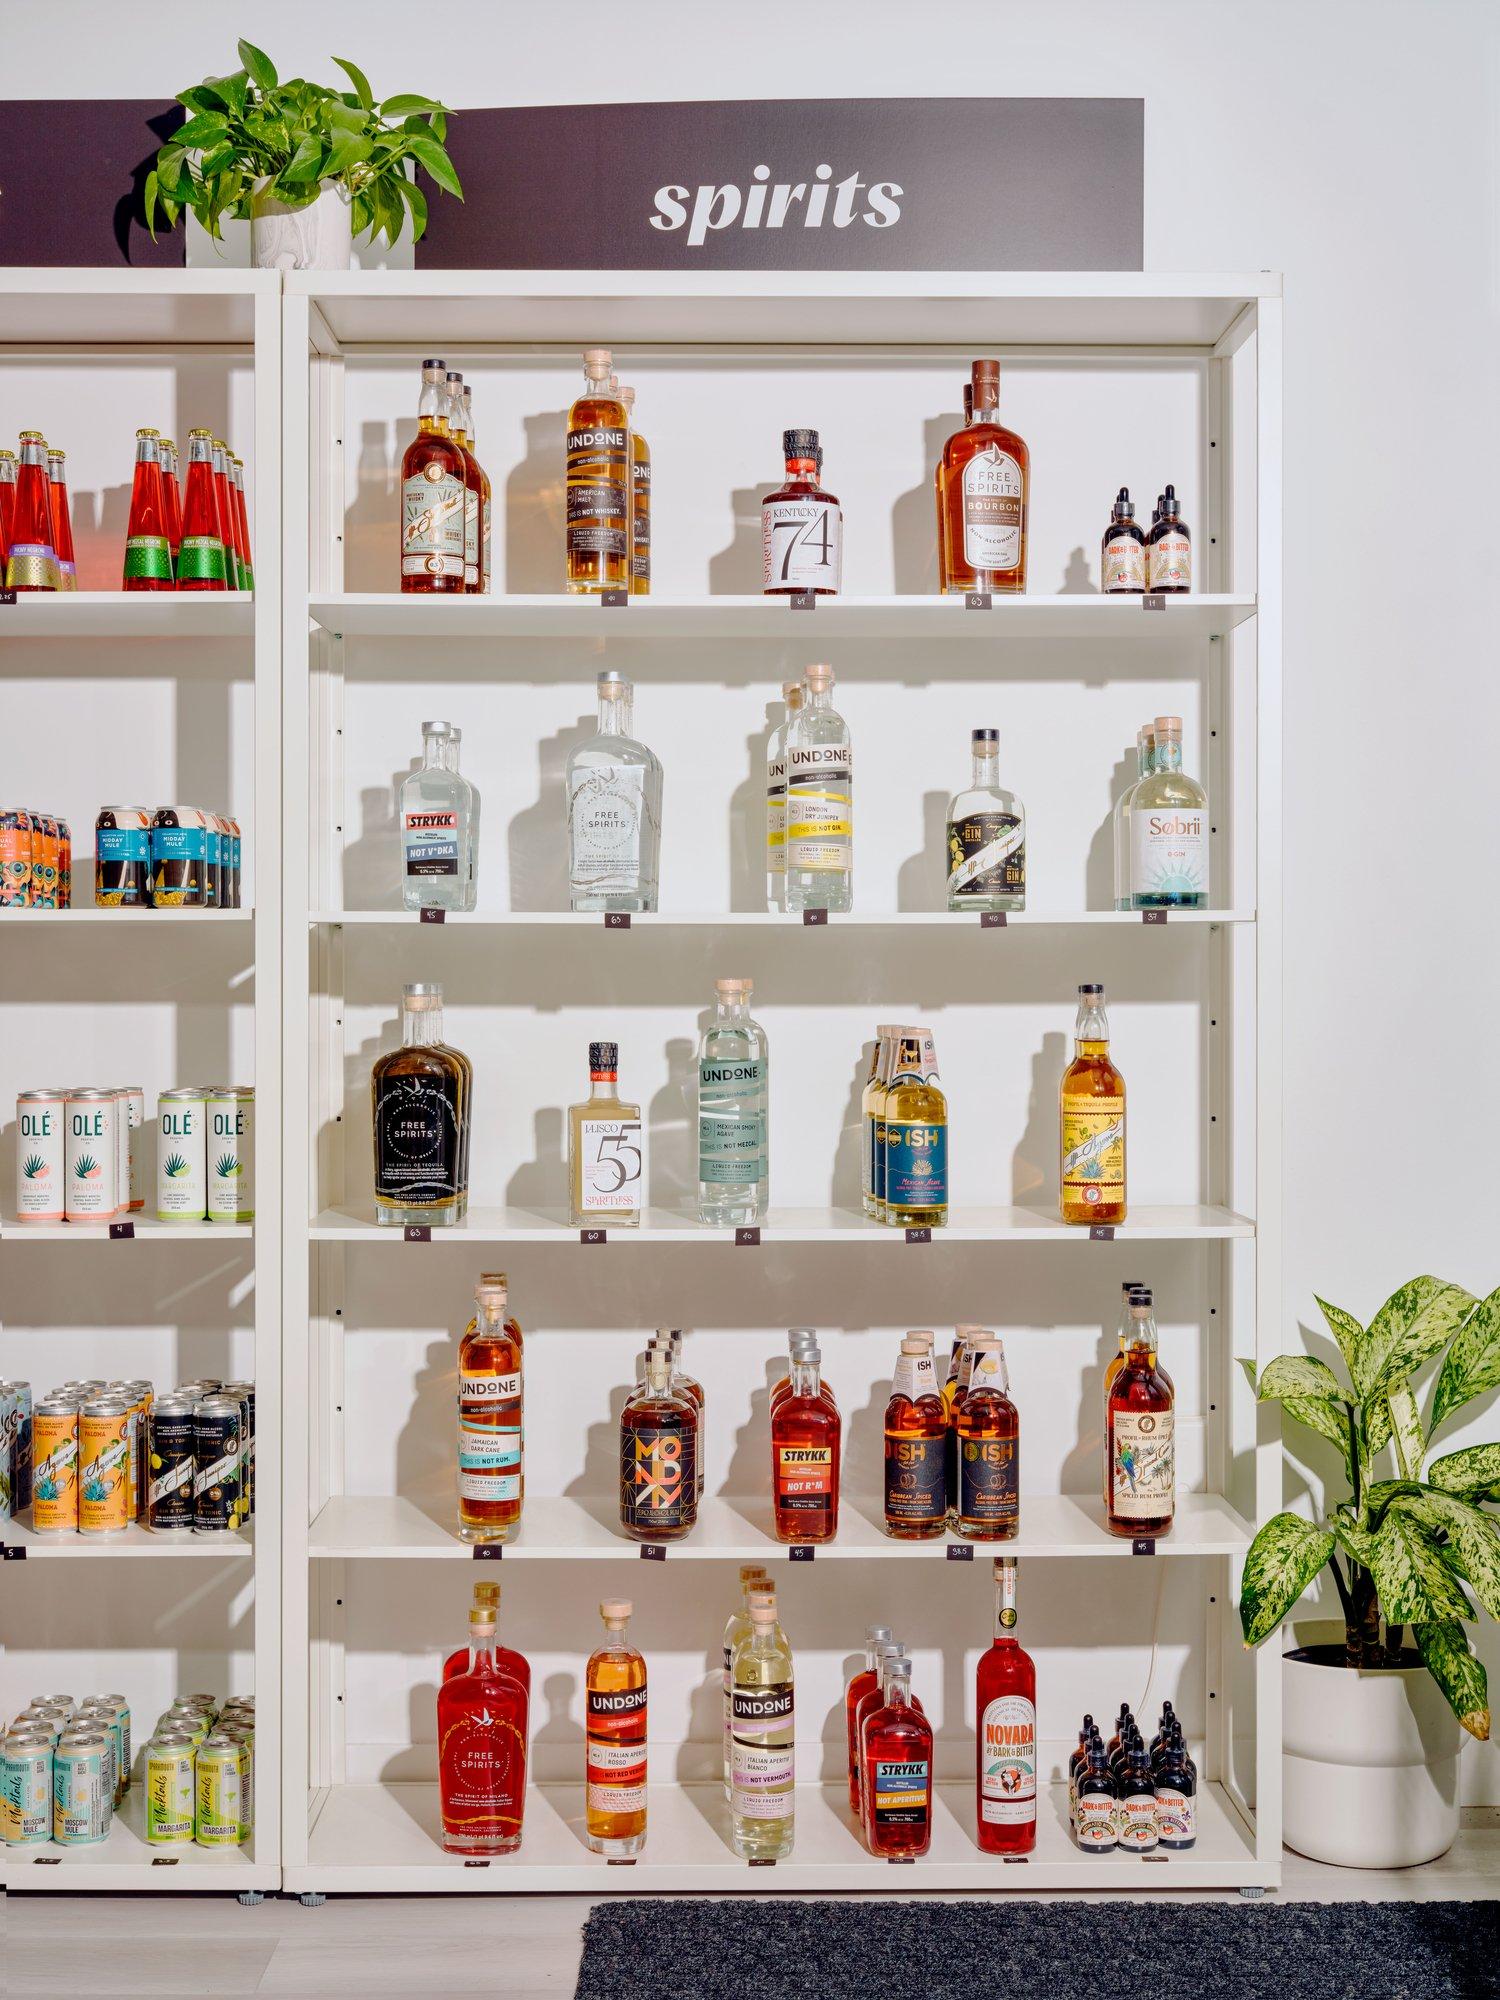 TOP SHELF: Bevvy's, a booze-free bottle shop, opened earlier this year in Toronto's Kensington Market neighbourhood. The shop's shelves are stocked with non-alcoholic options of all sorts: fancy sparkling waters, adaptogen-infused drinks, non-alcoholic wines and more.